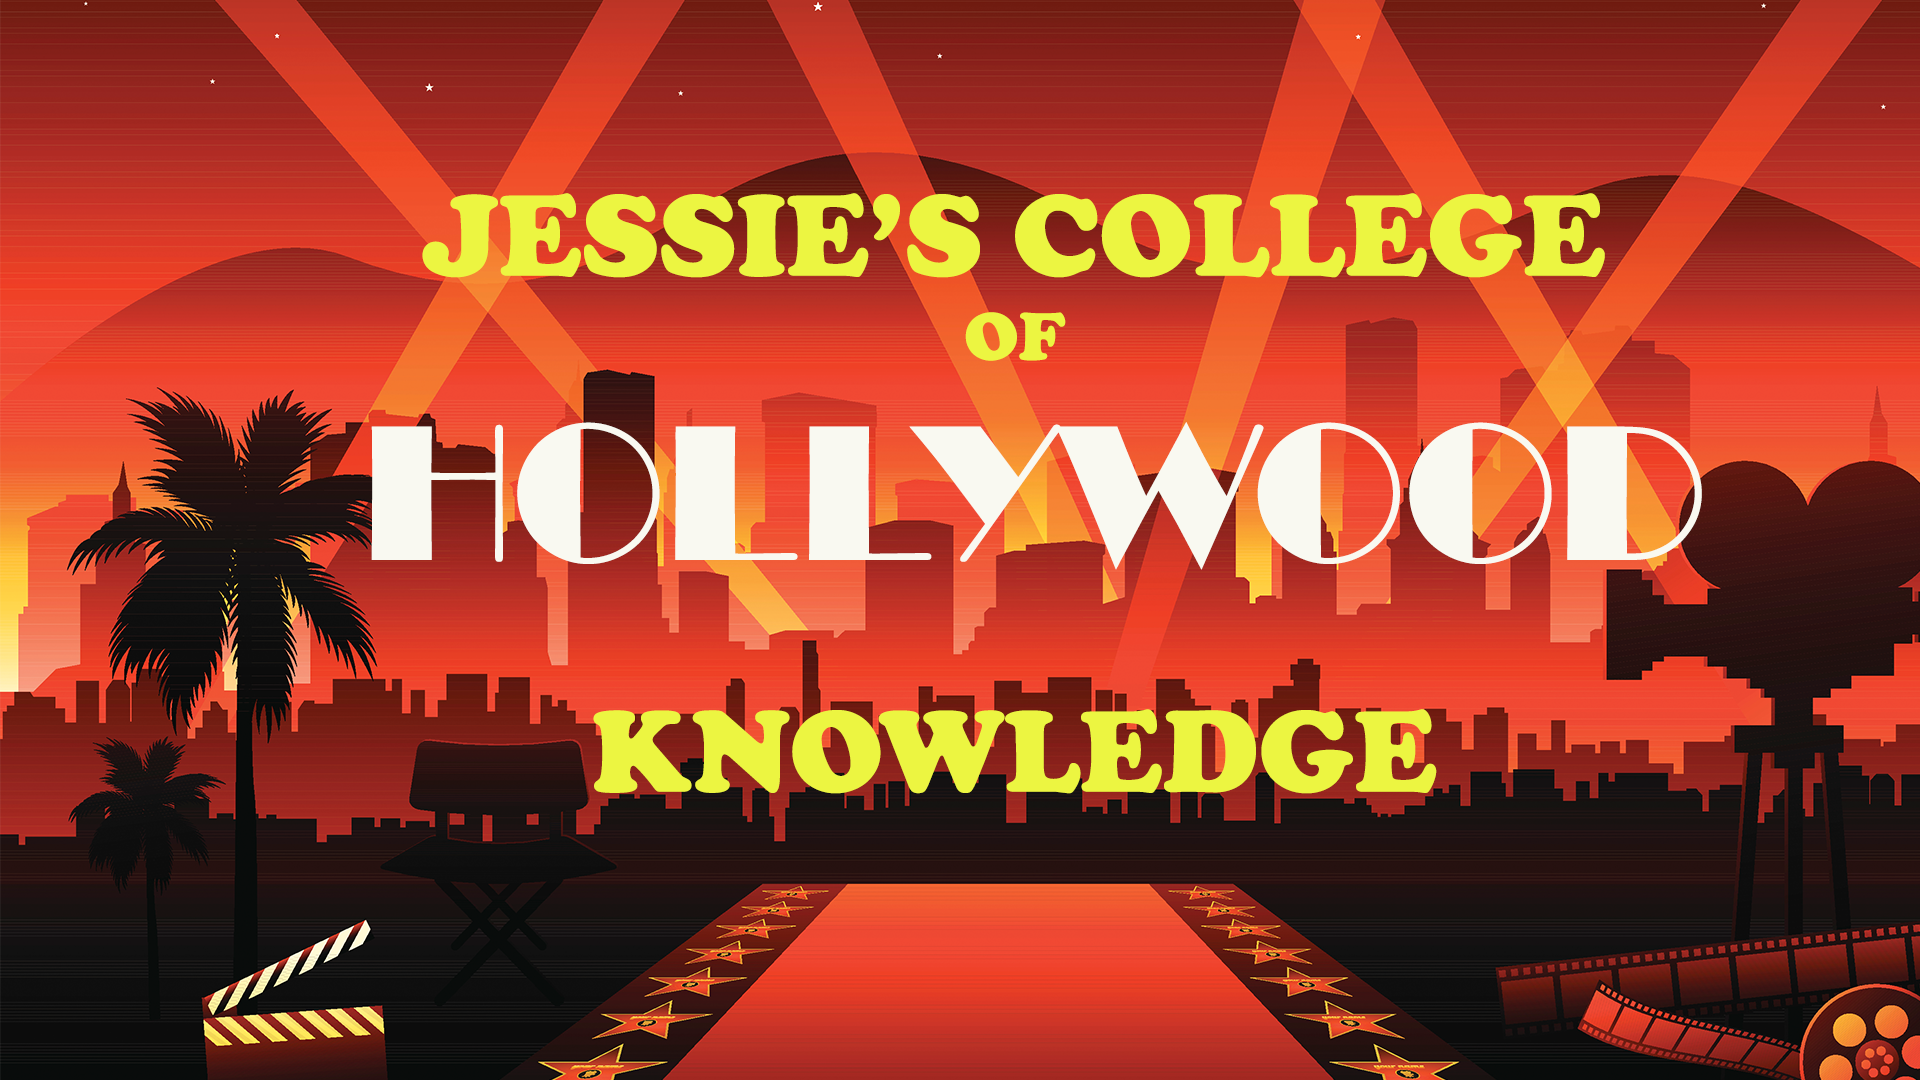 3/22/24 7:40AM Jessie's College of Hollywood Knowledge